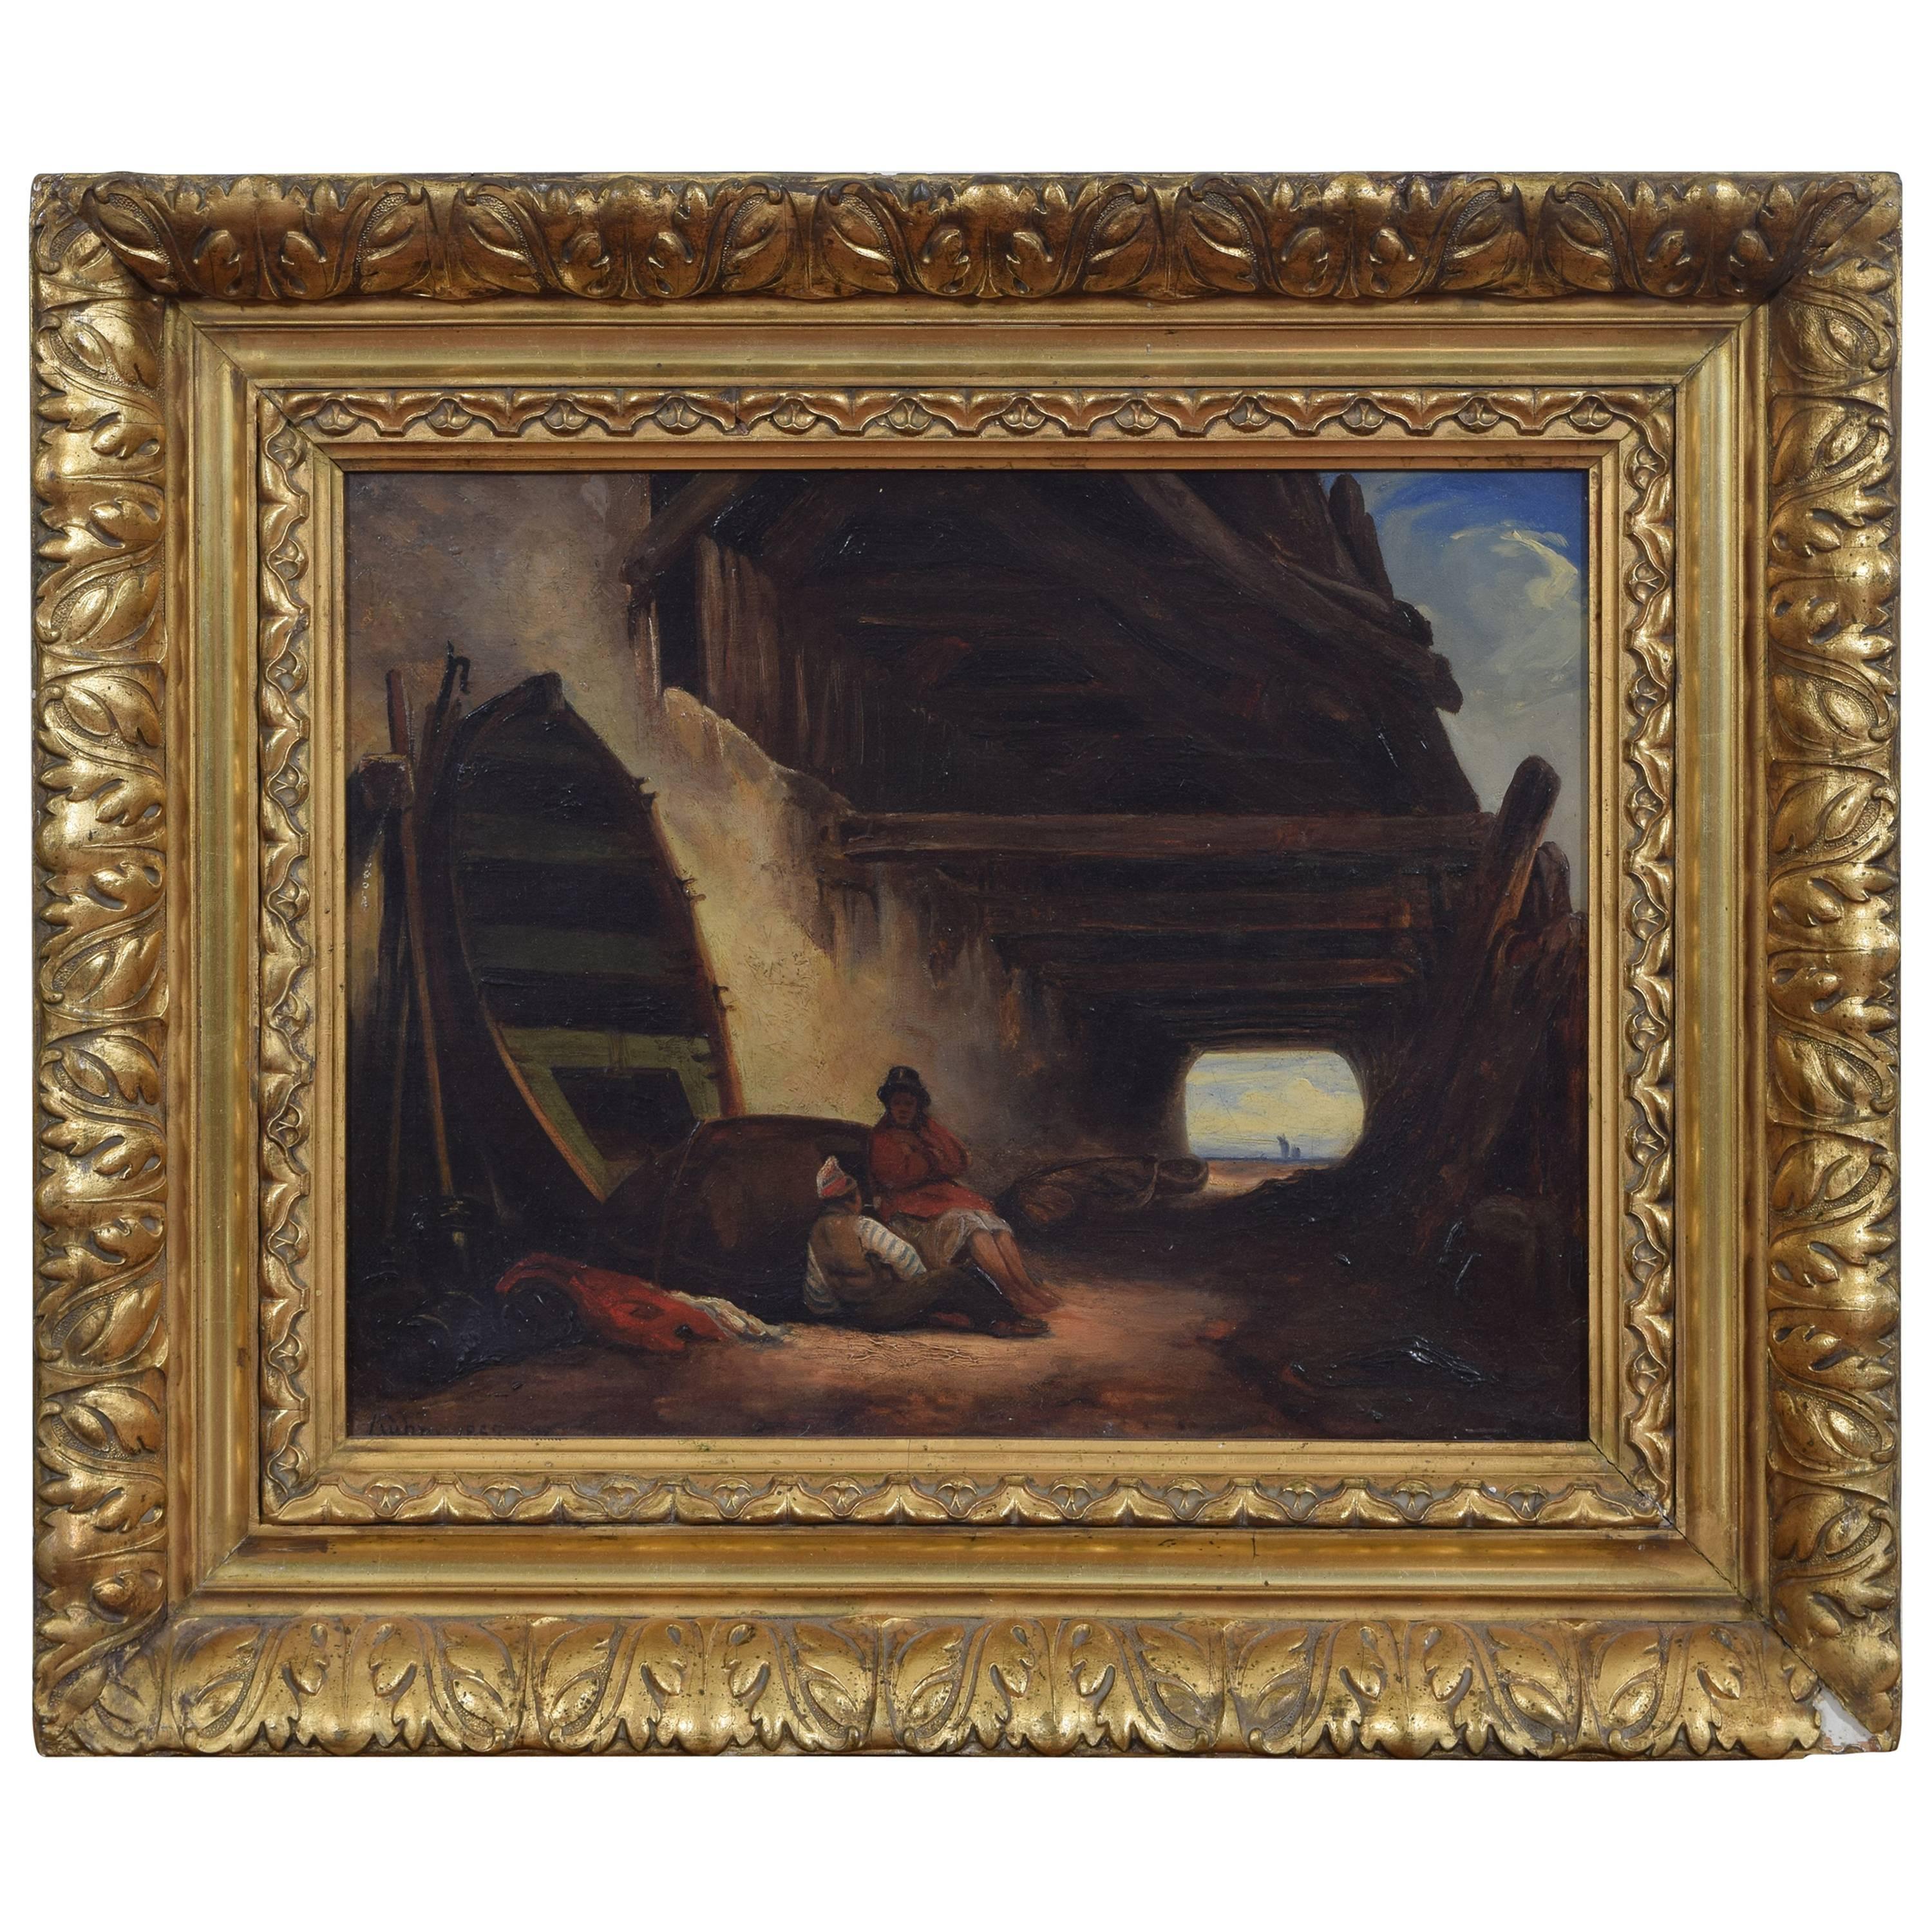 Continental Oil on Canvas of Two Figures Relaxing under an Eaves, circa 1855